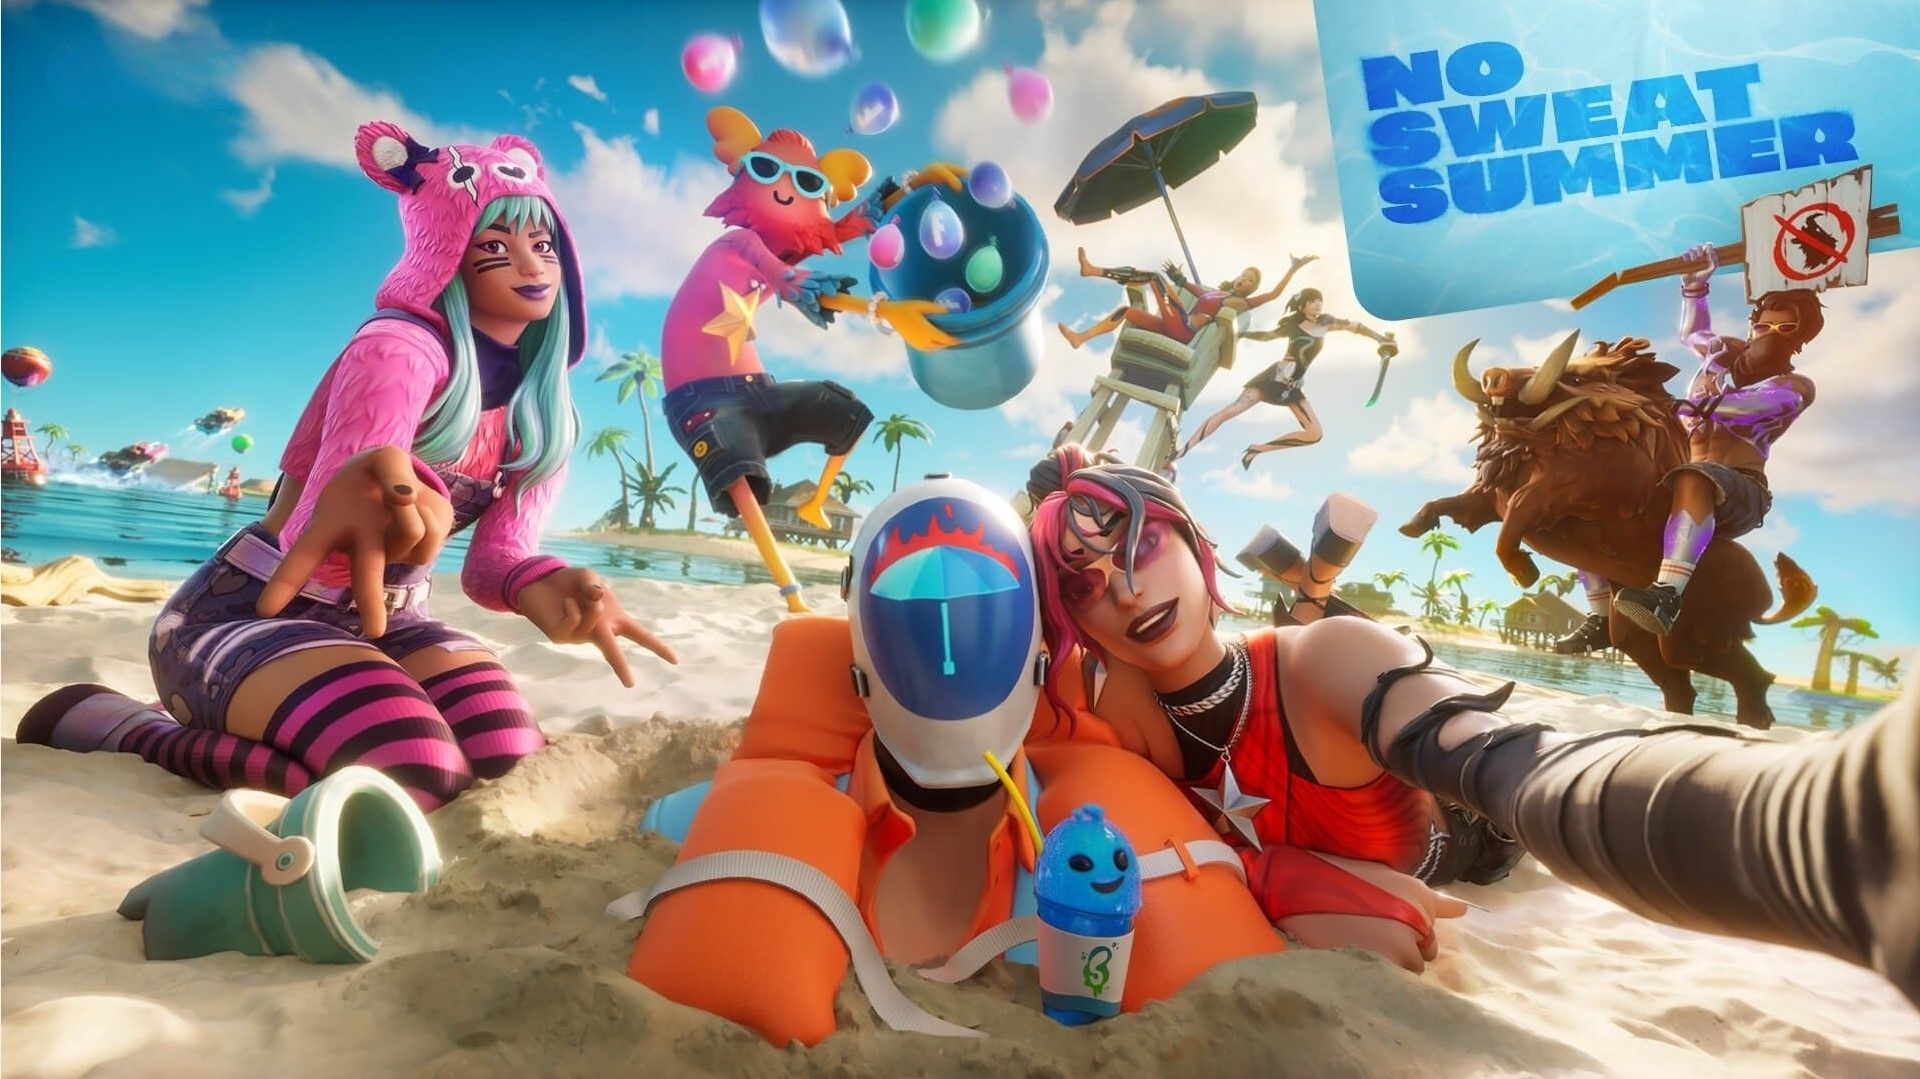 Fortnite No Sweat Summer Event Begins With New Quests & Skins